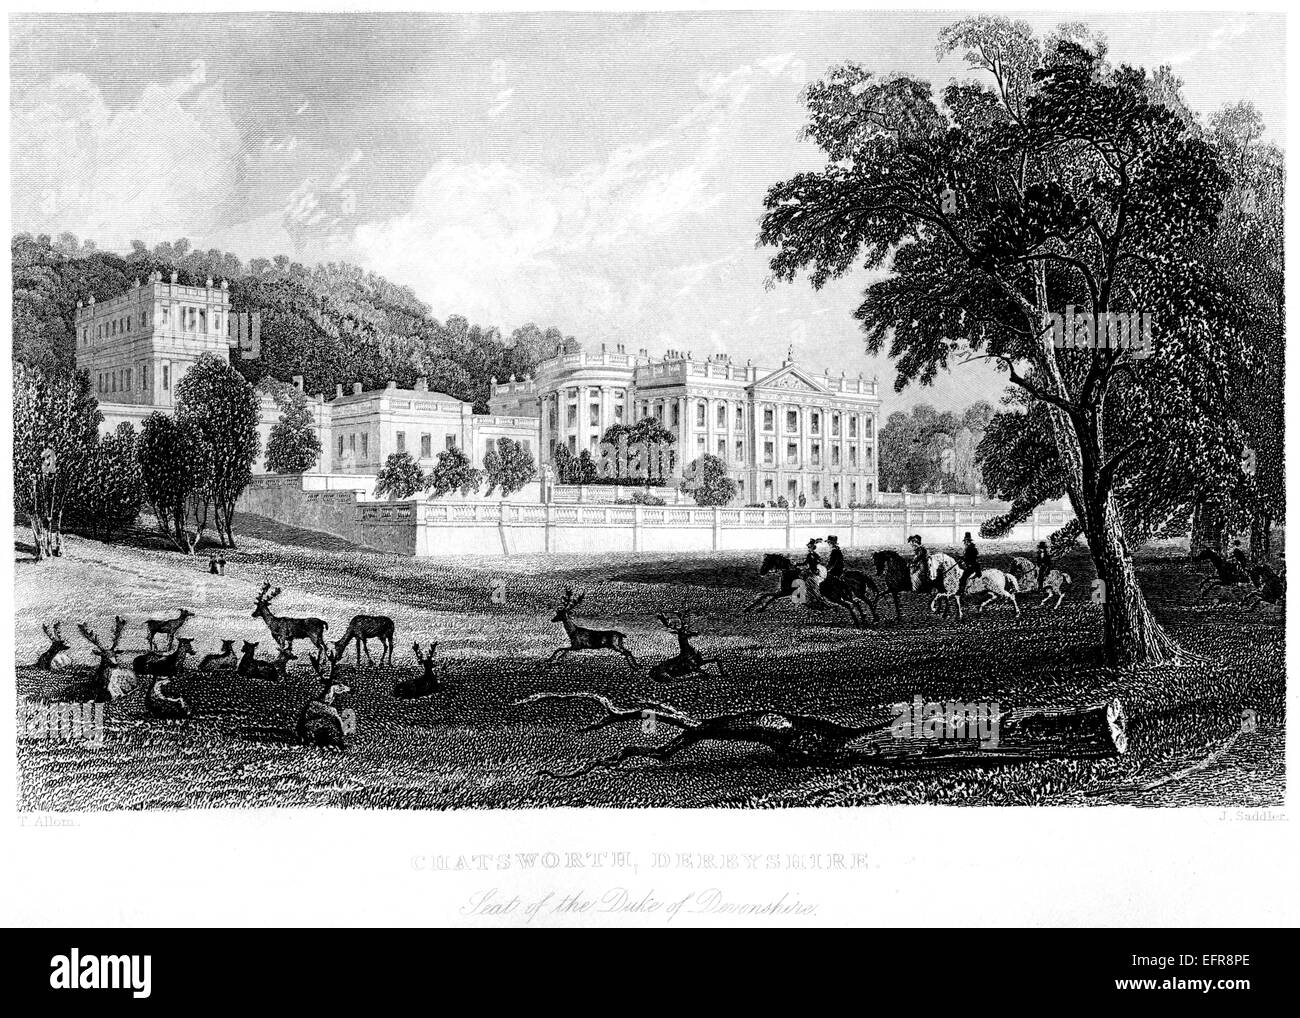 Engraving of Chatsworth, Derbyshire - Seat of the Duke of Devonshire scanned at high resolution from a book printed in 1845. Believed copyright free. Stock Photo